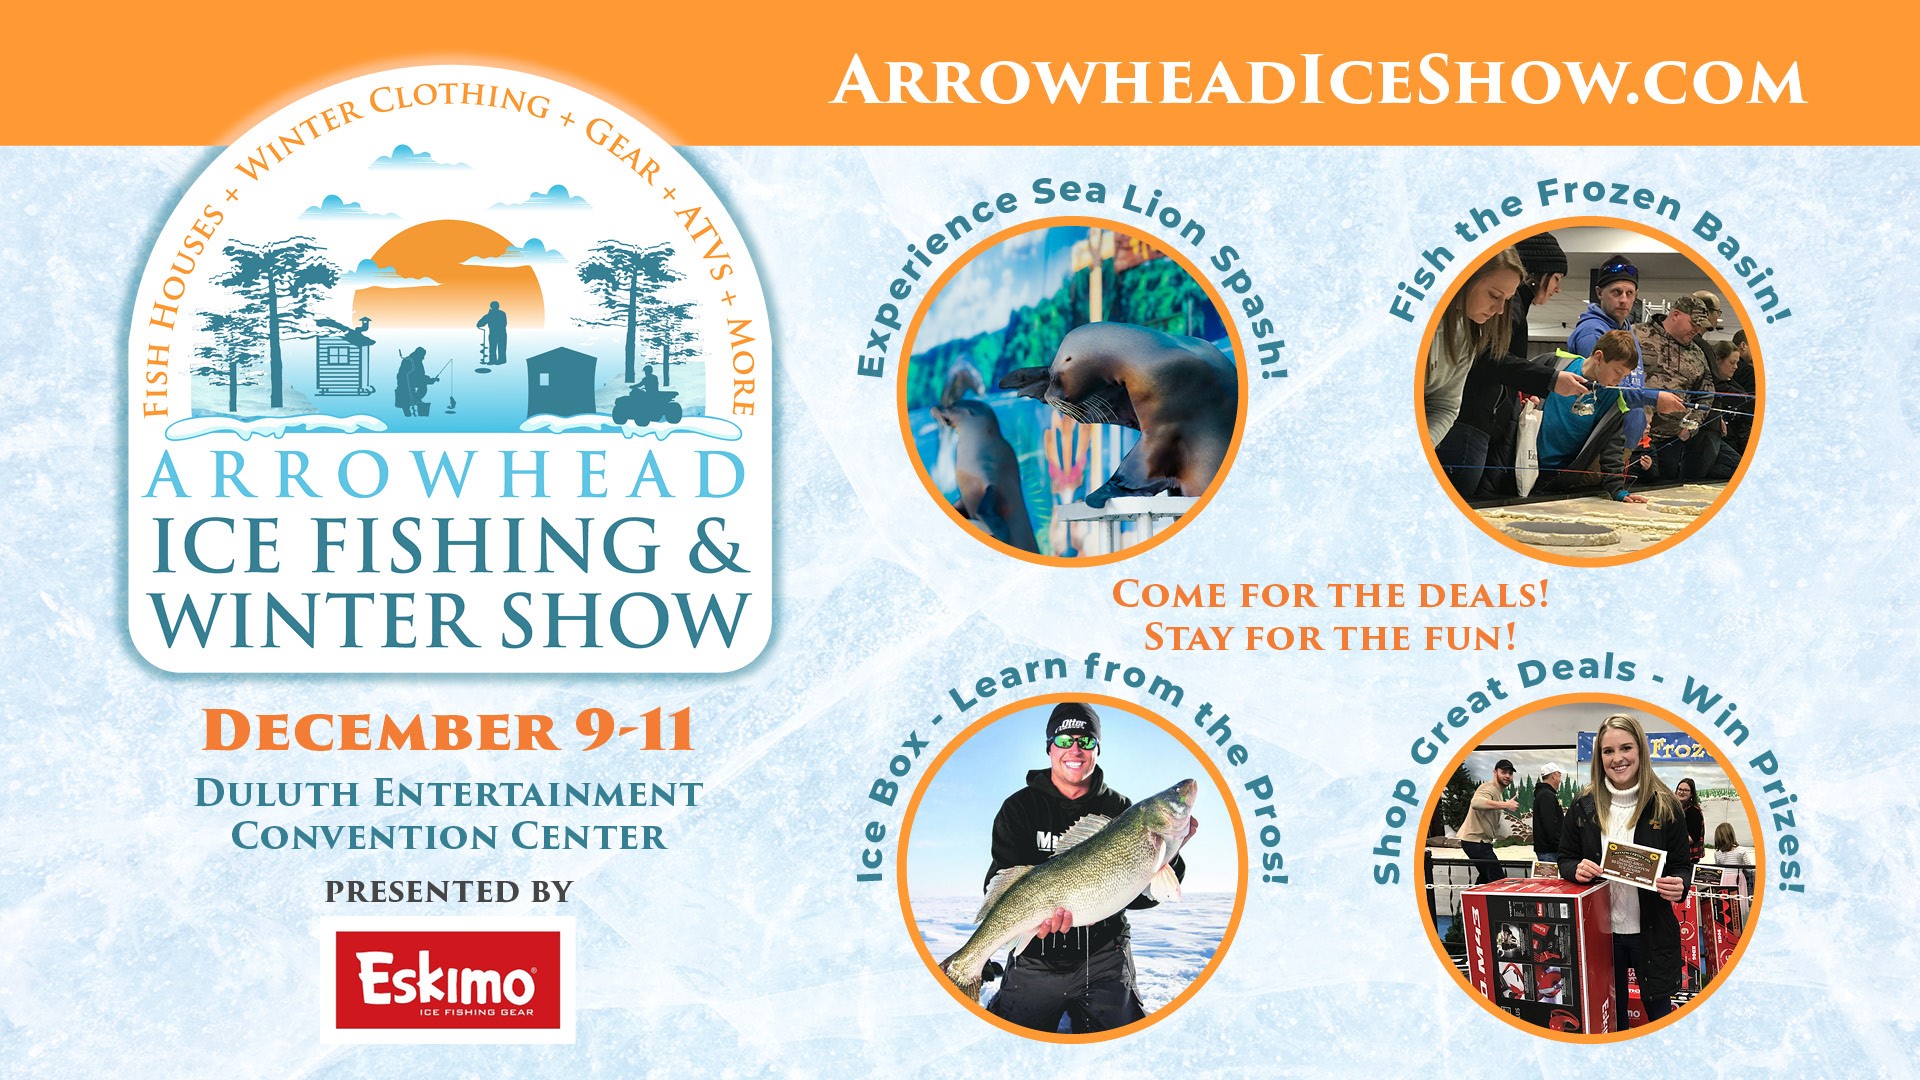 Arrowhead Ice Fishing & Winter Show starts Friday in Duluth